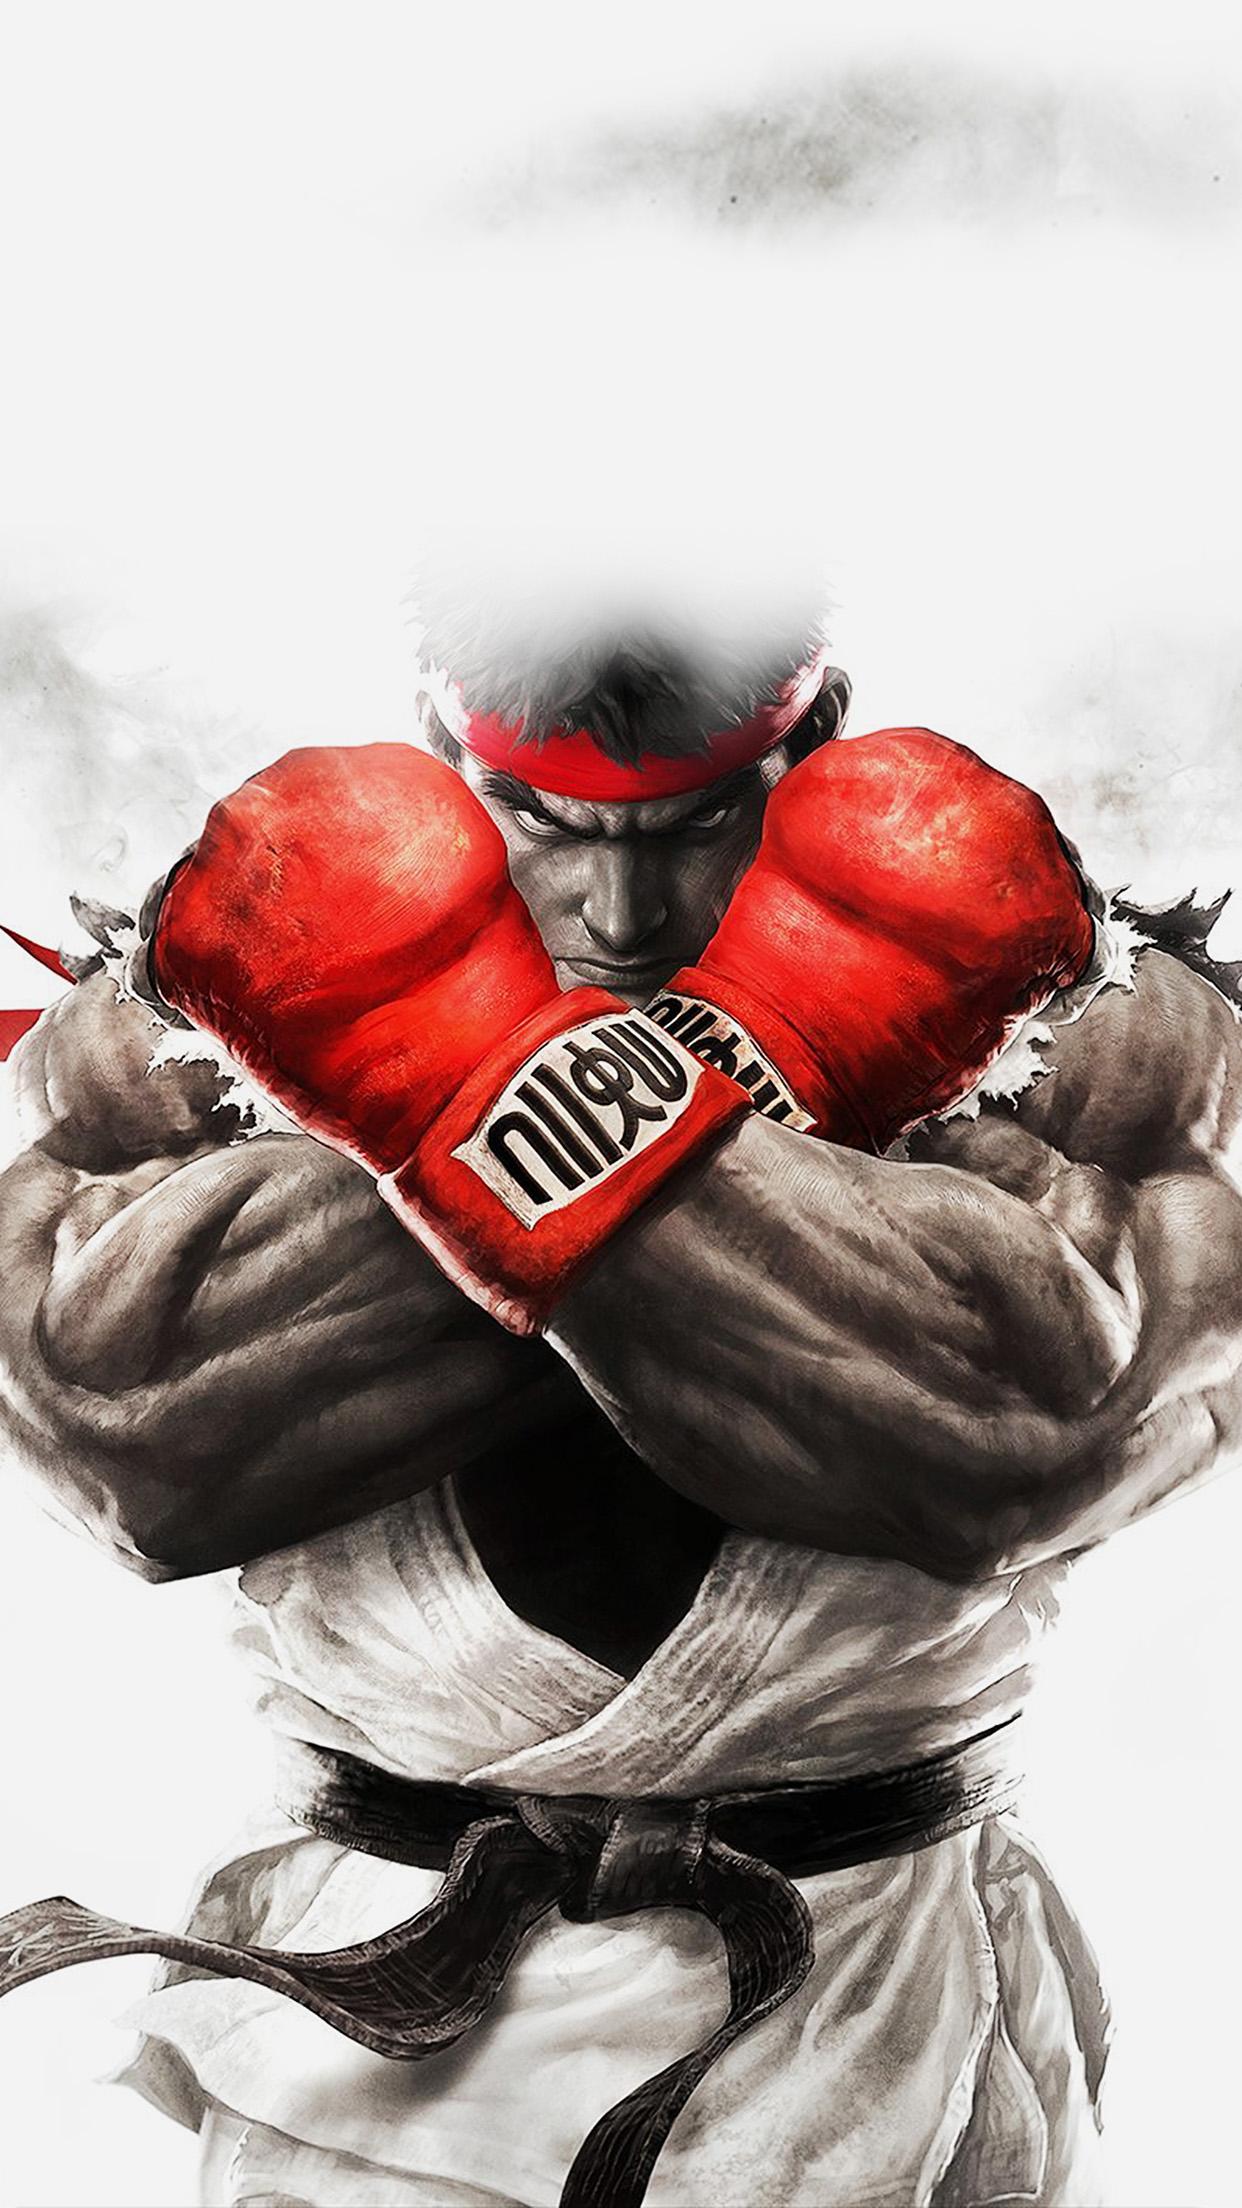 Street Fighter Illustration Game Android Wallpaper free download